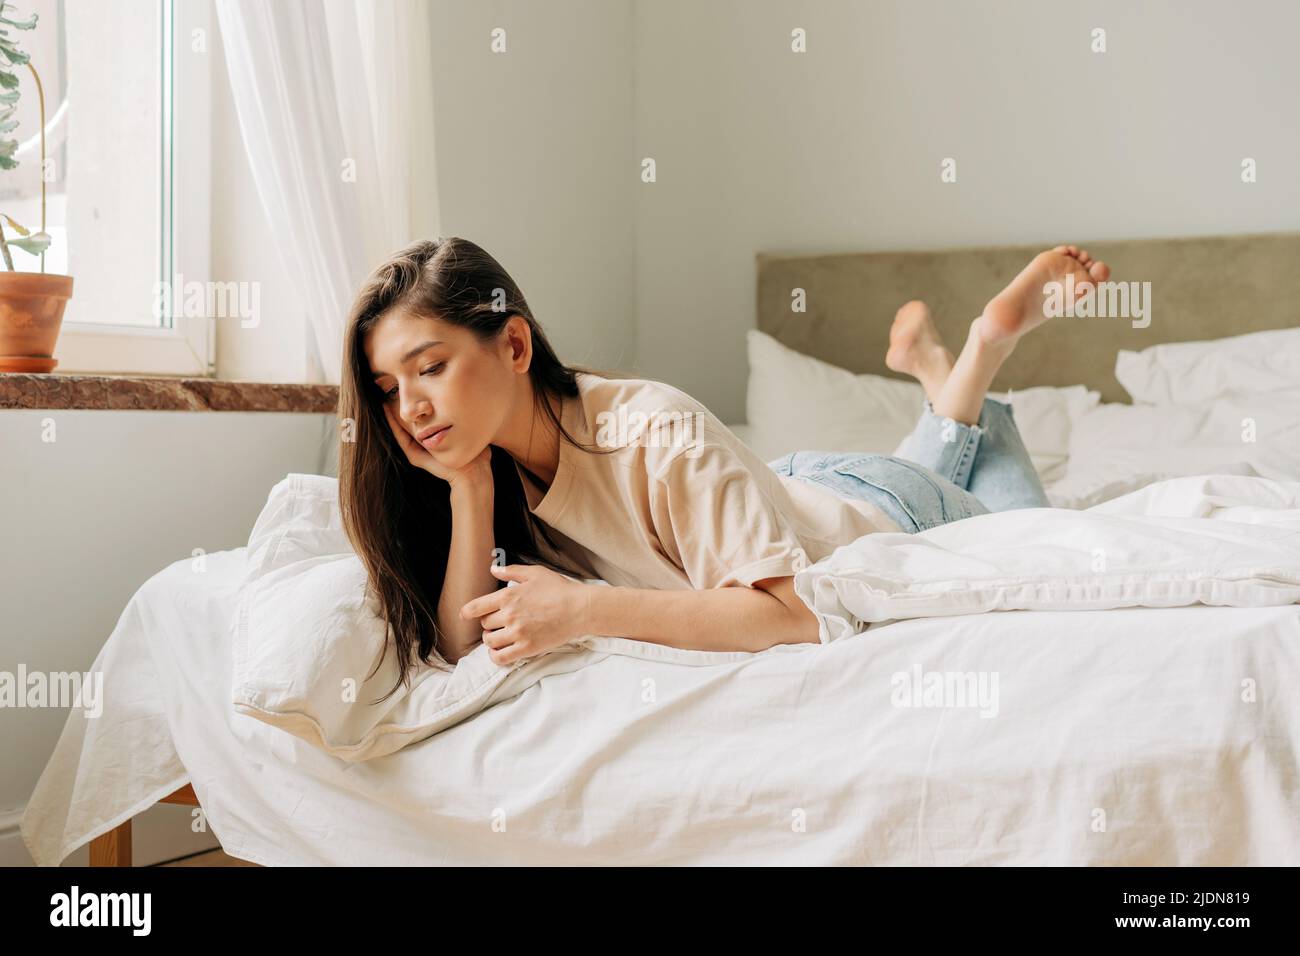 A bored adolescent woman lies on the bed thinking. Stock Photo